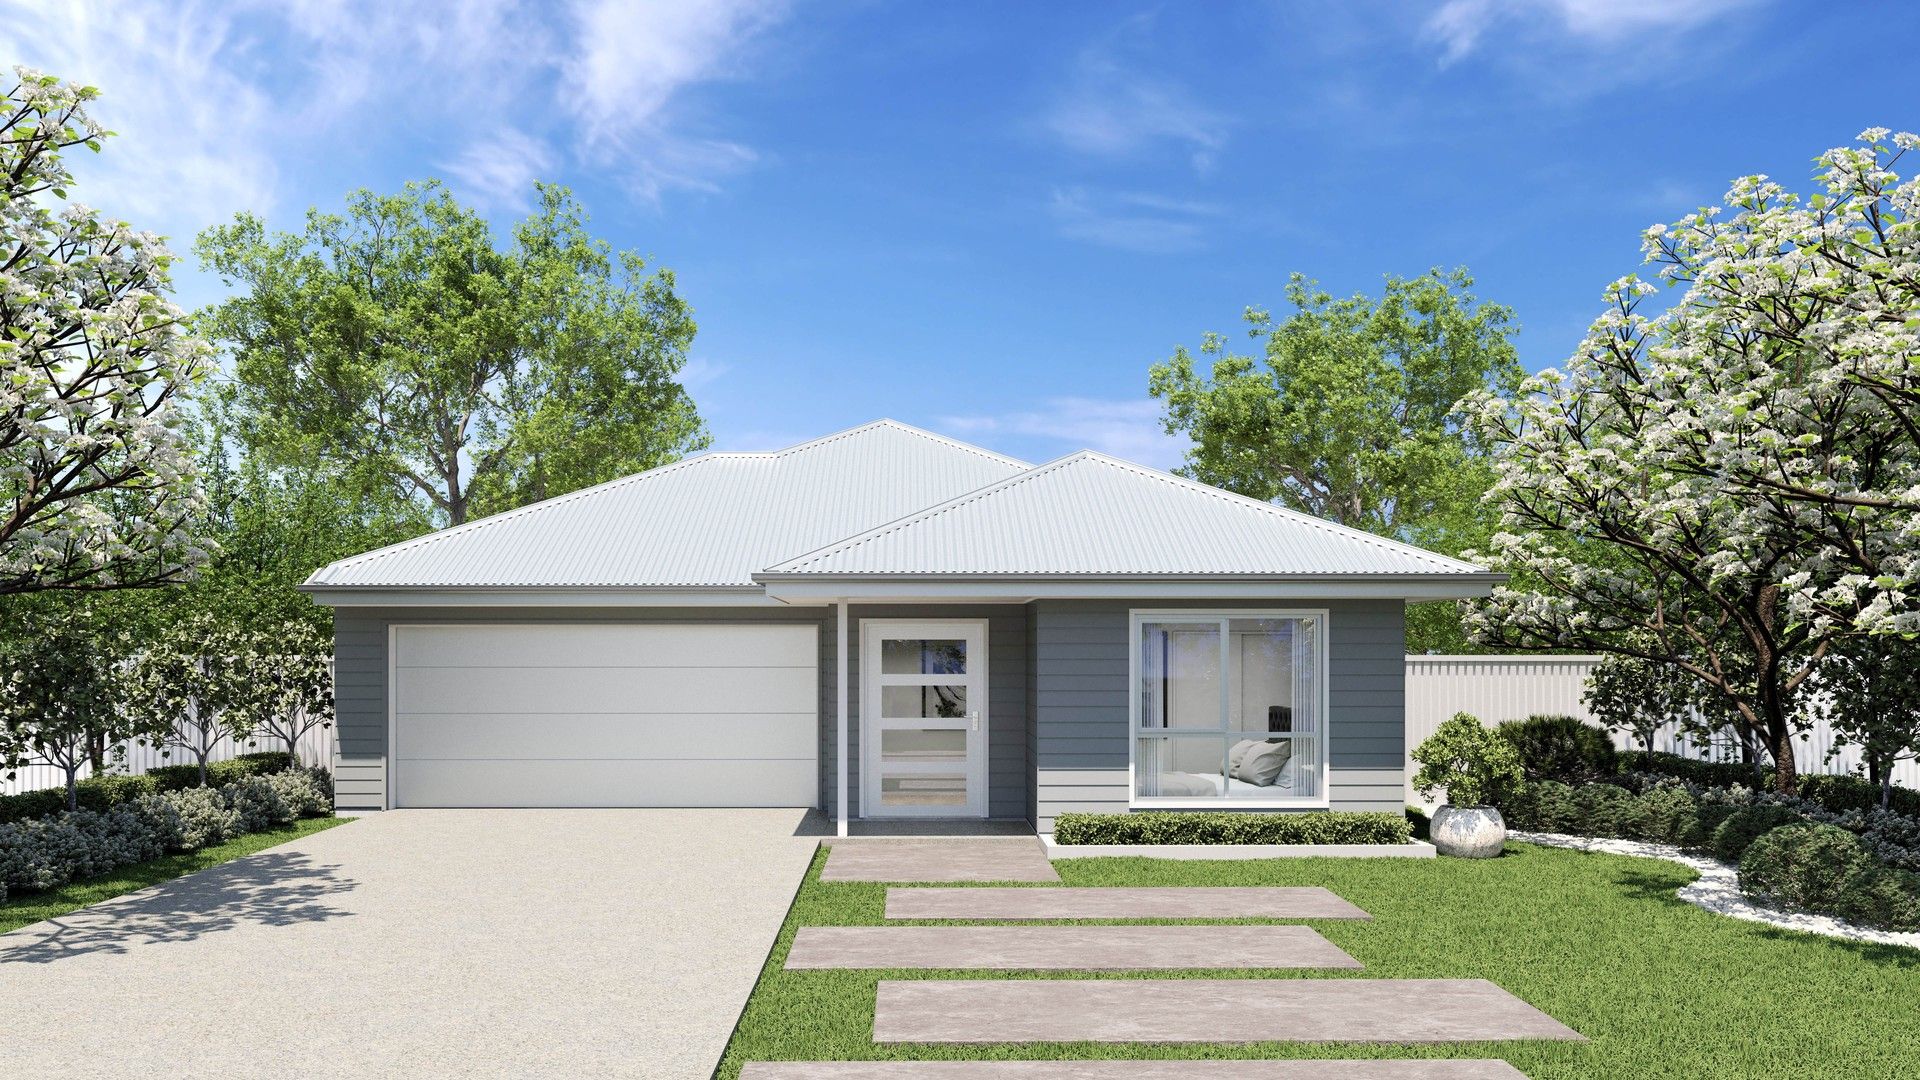 3 bedrooms New House & Land in Lot 136 New Road CABOOLTURE SOUTH QLD, 4510